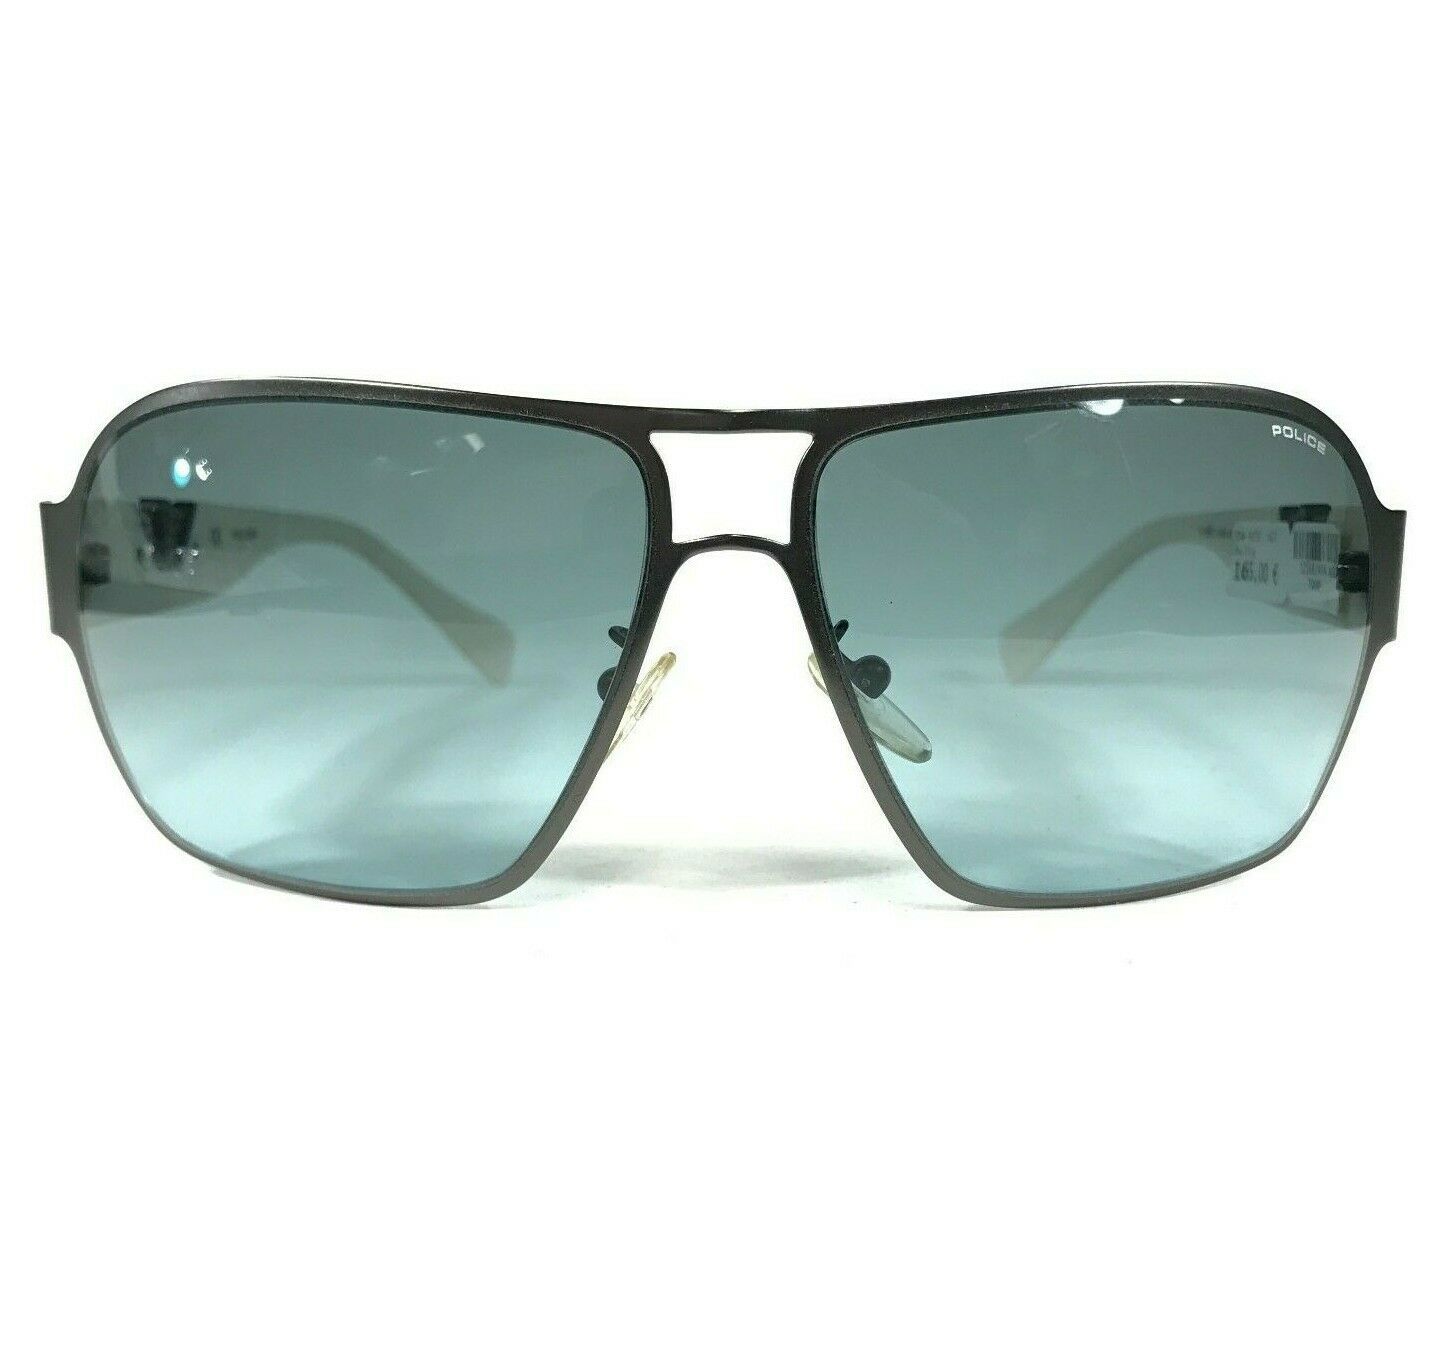 Primary image for Police Sunglasses S8753 Gray White Square Aviators with Blue Lenses 61-14-130